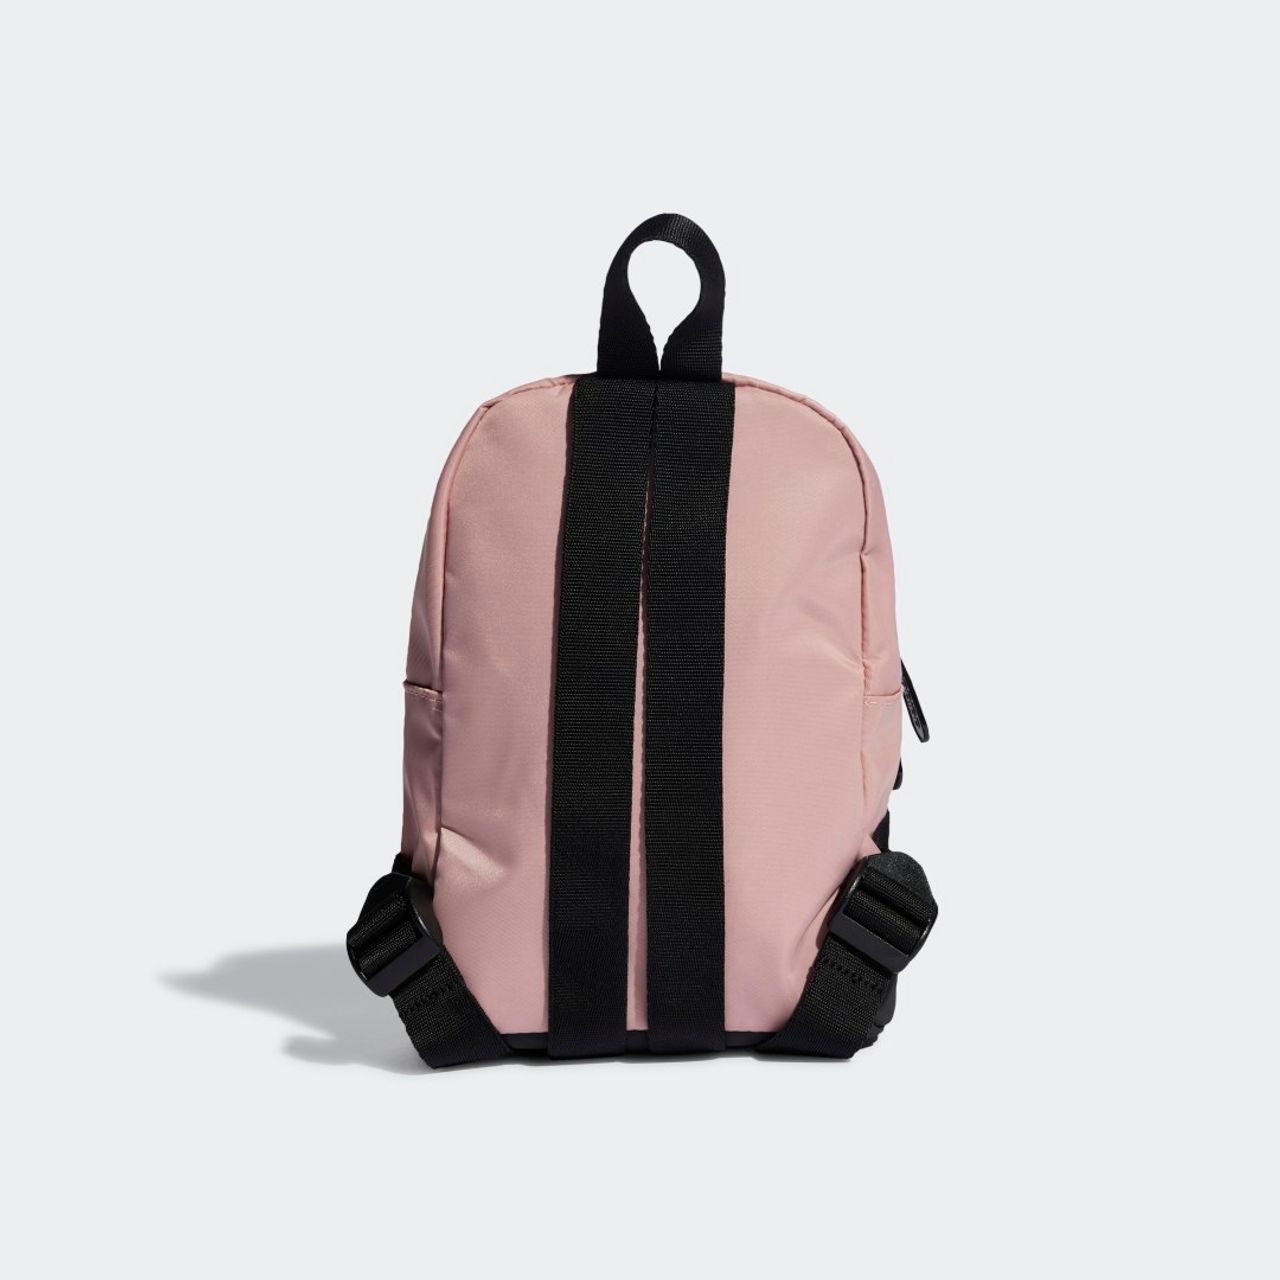 Tailored For Her Material Rucksack XS